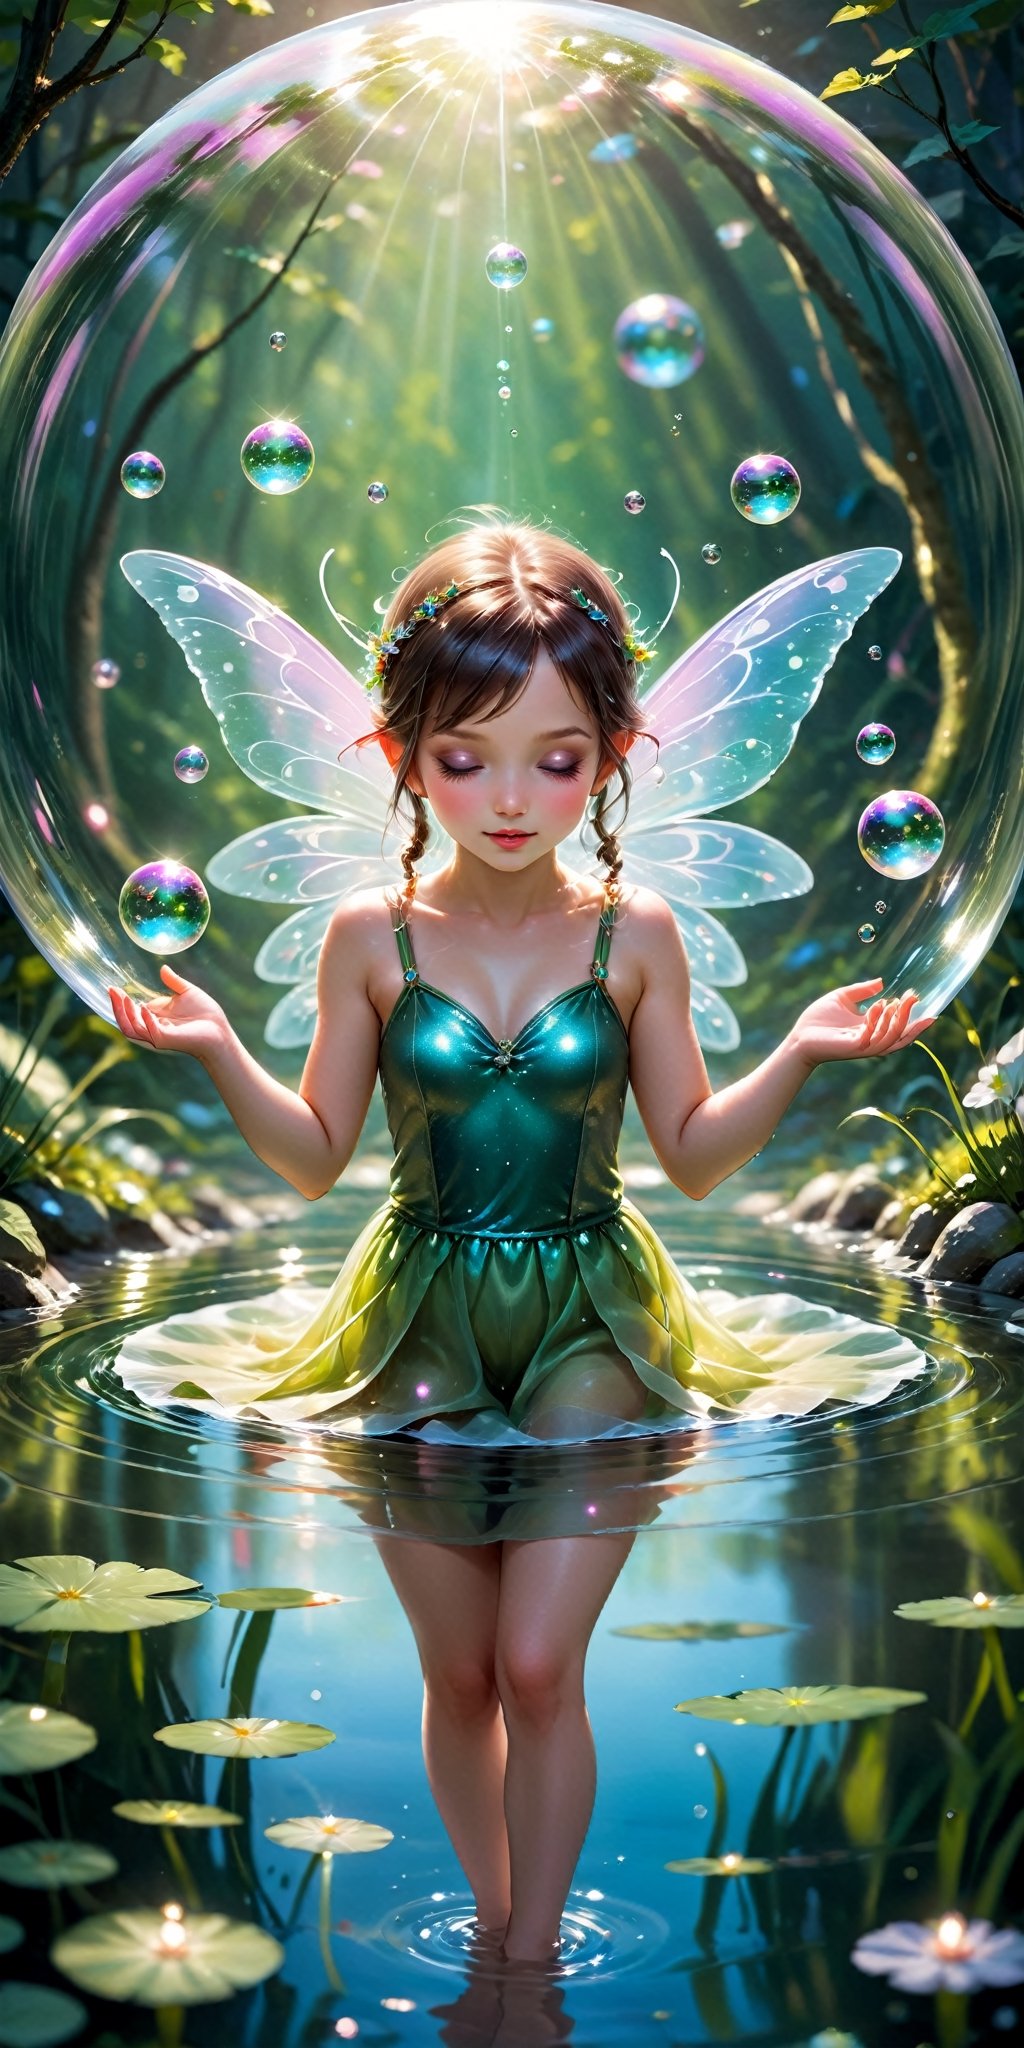 Imagine a scene of enchantment featuring beautiful tiny mini fairies gracefully positioned inside glistening water bubbles. Encourage artists to capture the ethereal beauty of these magical beings against a captivating background, creating a visually stunning and whimsical image. This prompt invites the creation of a beautiful and mesmerizing scene that celebrates the delicate allure of fairies and the enchantment found within sparkling water bubbles.